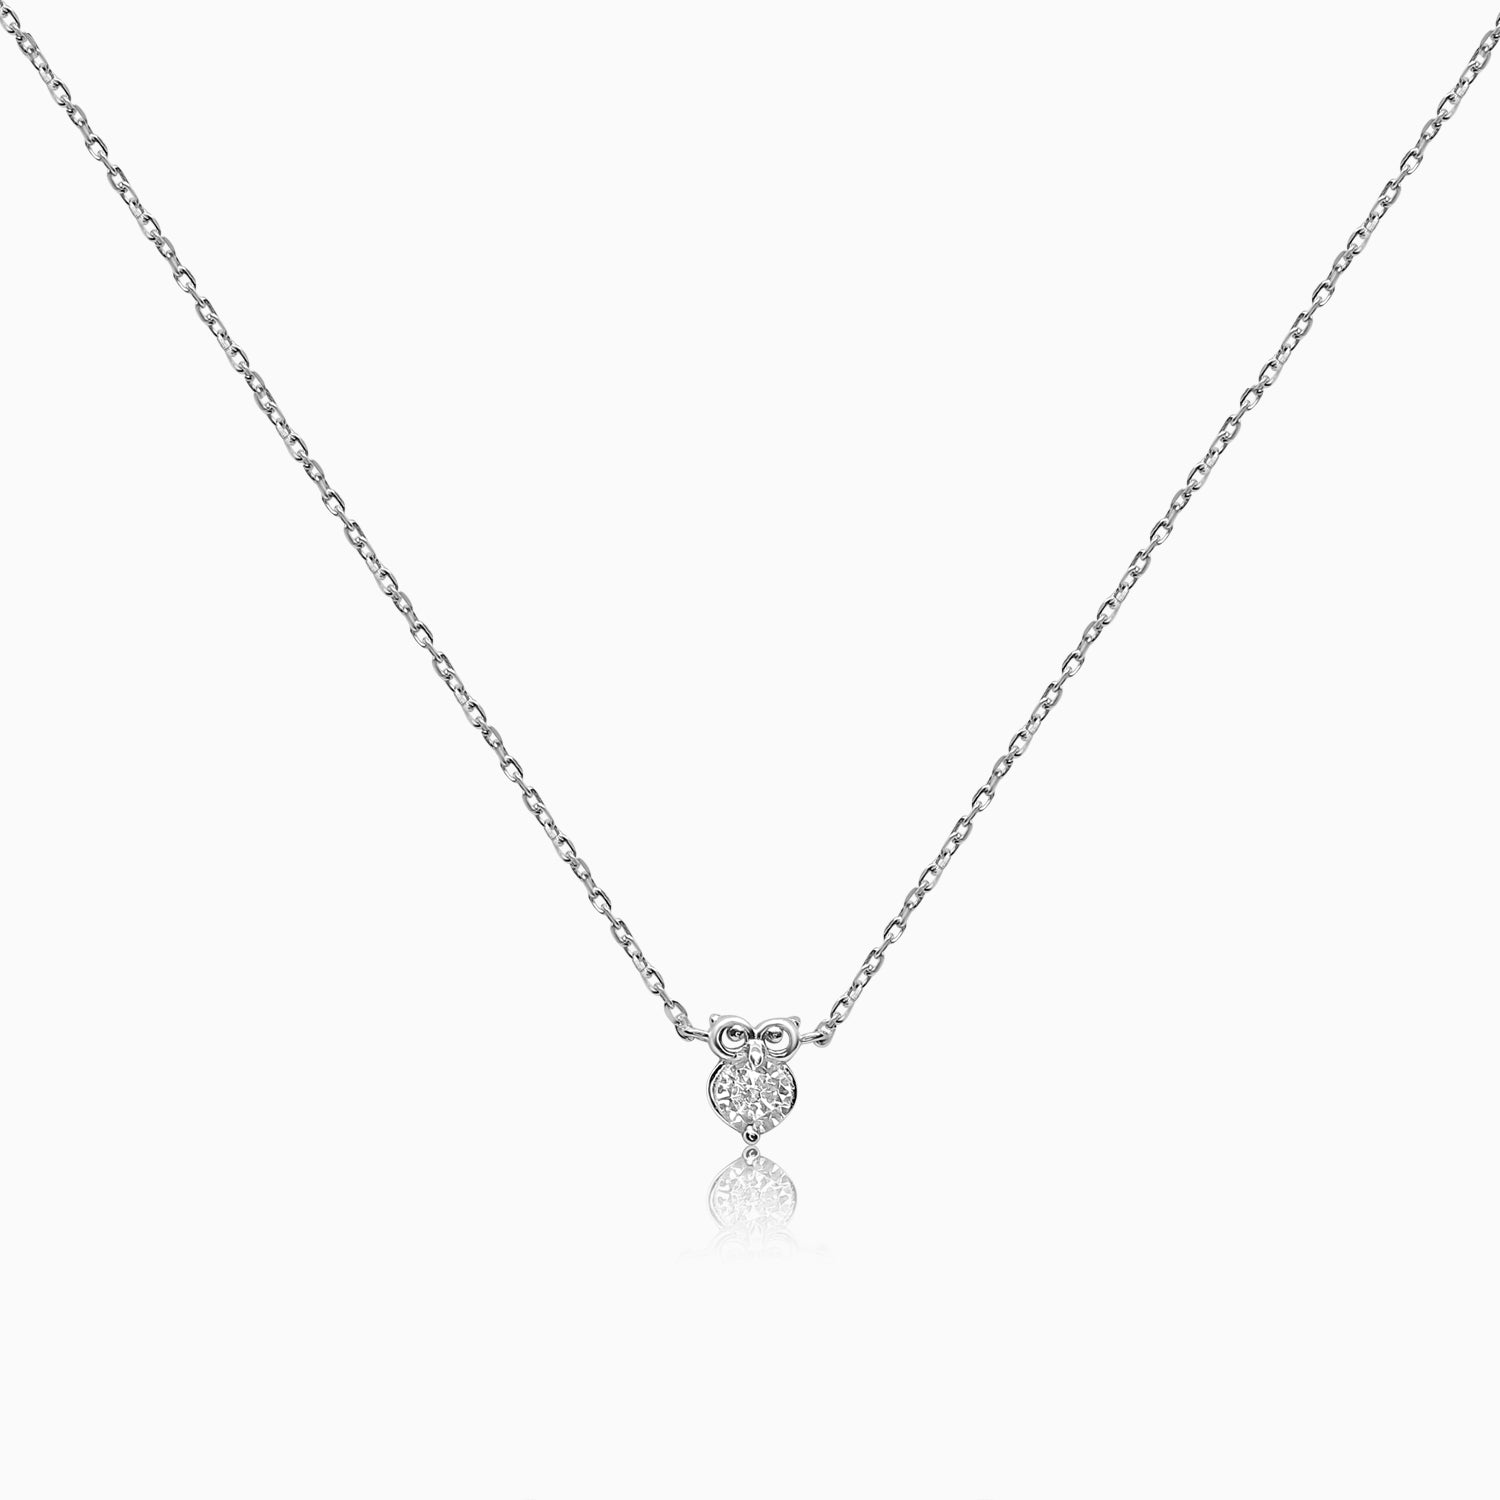 Silver Micro Owl Solitaire Necklace